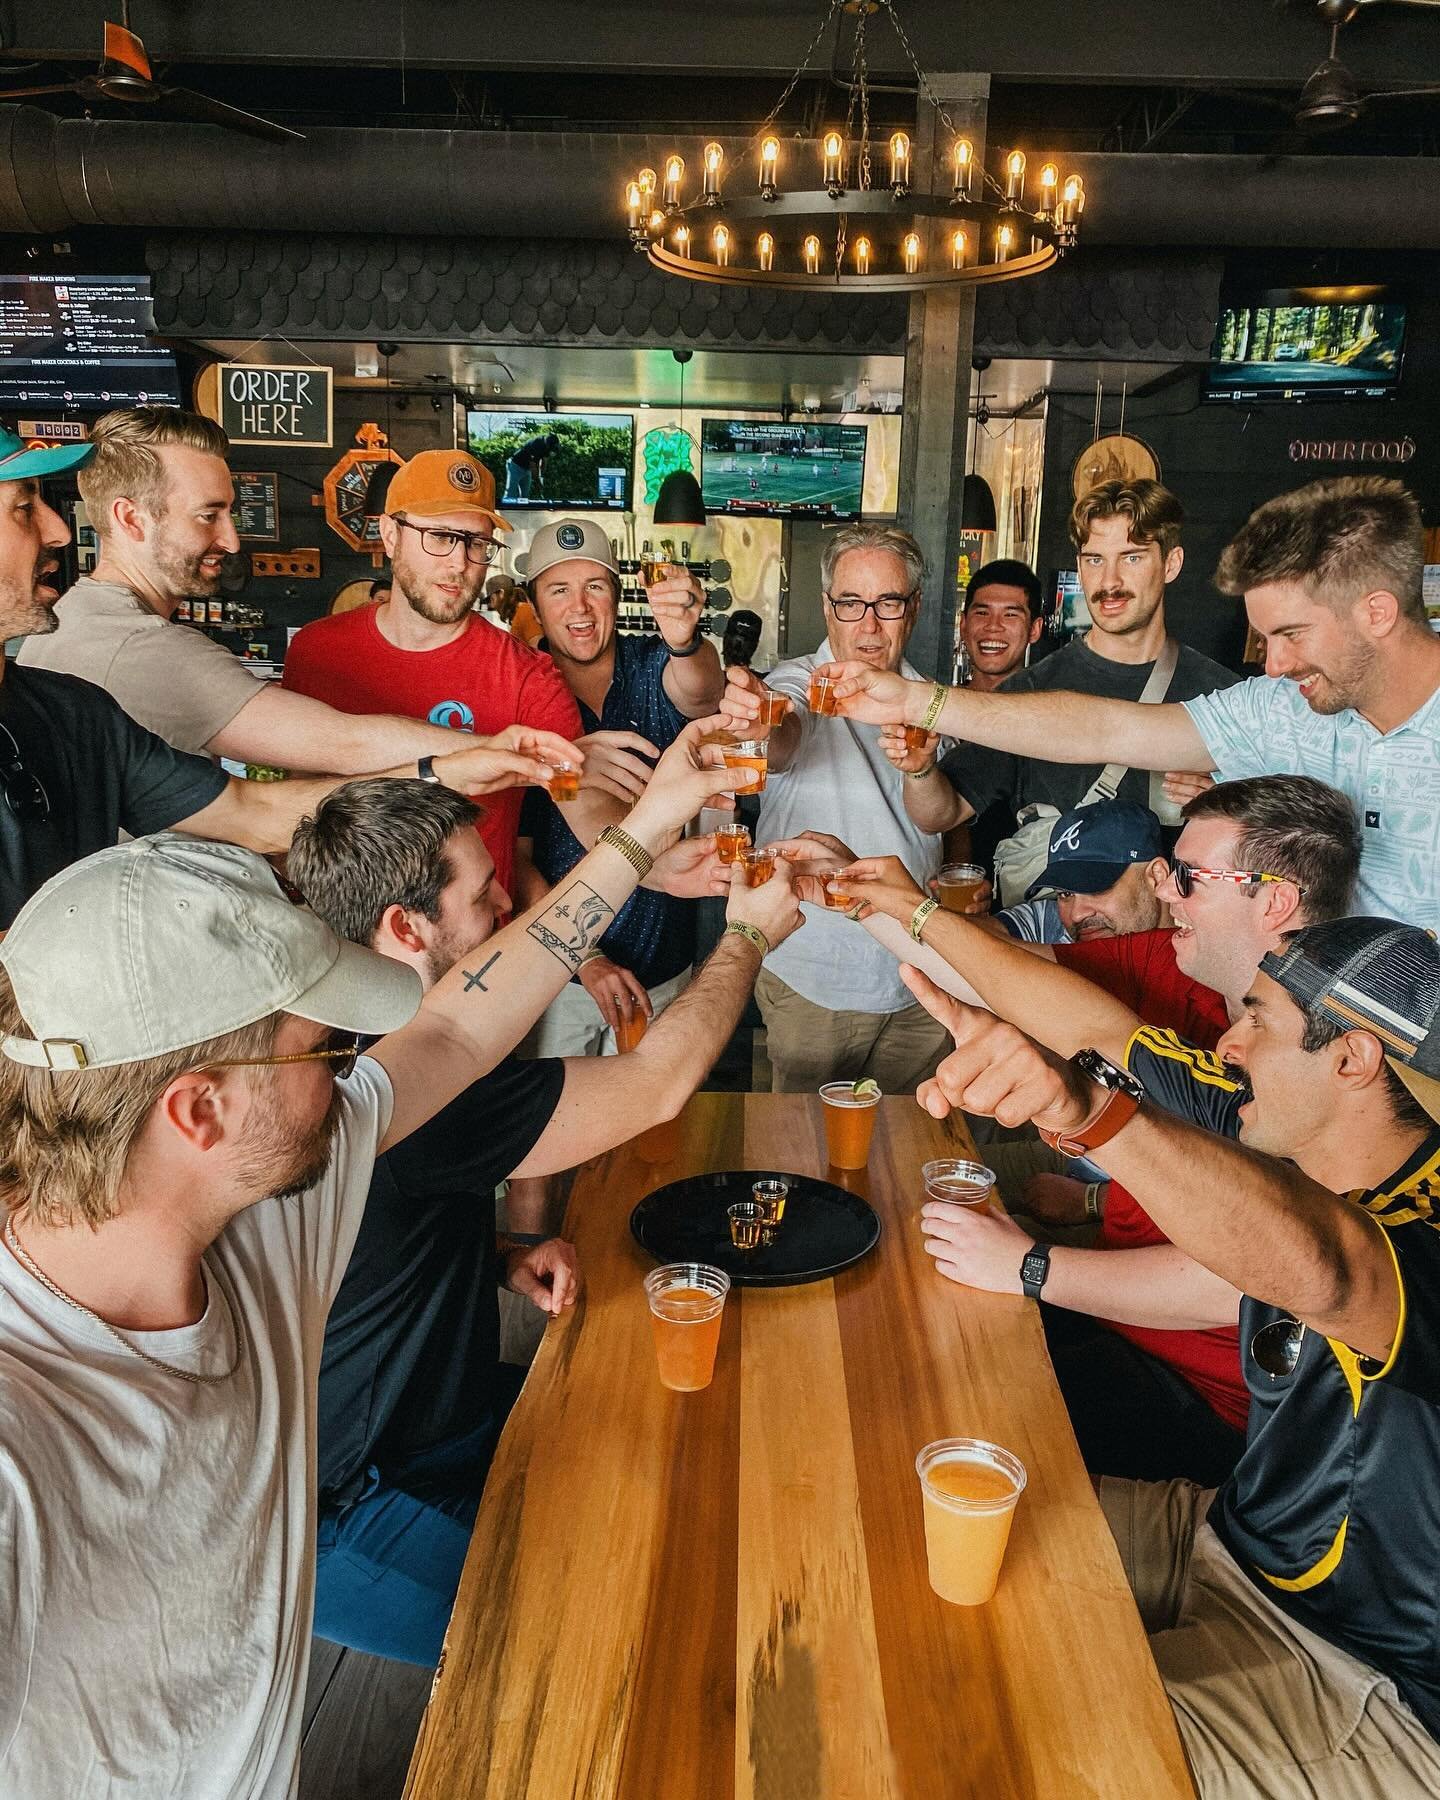 Did someone say Bachelor party? 👀🔥🥃

Taking shots and celebrating life&rsquo;s milestones at Fire Maker sounds pretty good 😉

#bachelorparty #brewery #bar #westmidtownatl